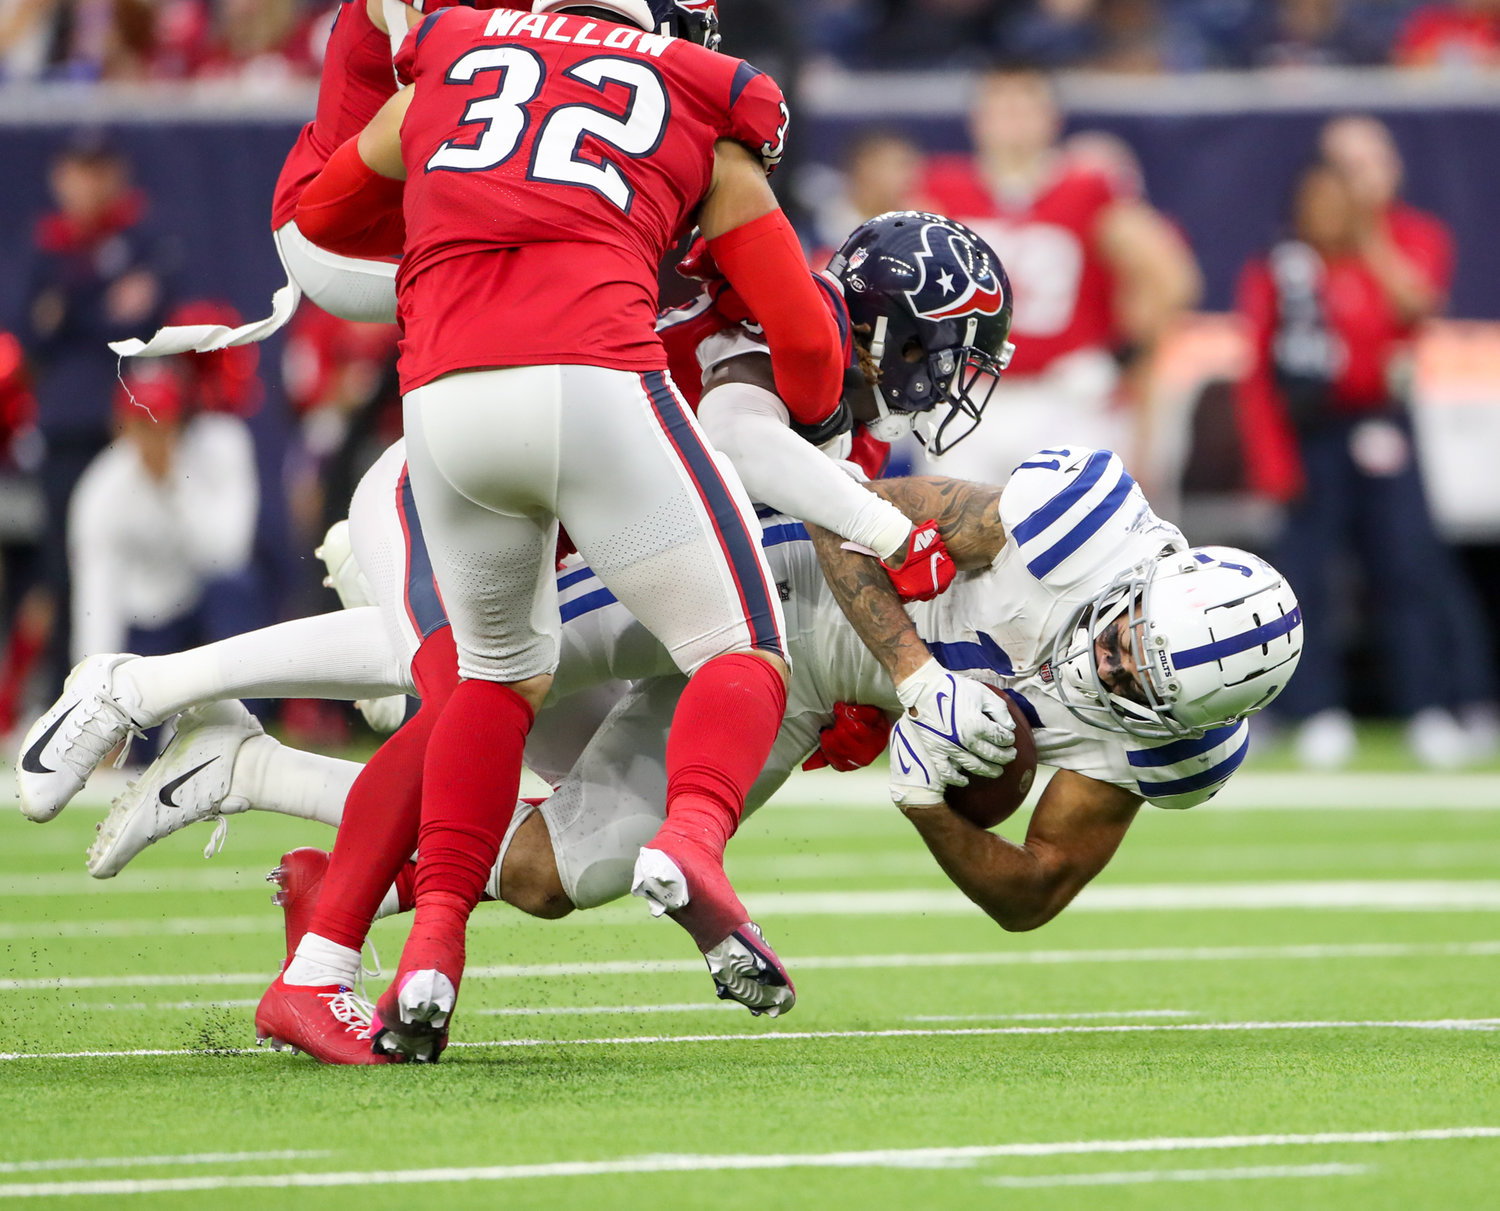 Indianapolis Colts wide receiver Michael Pittman Jr. (11) is tackled after a reception during an NFL game between the Texans and the Colts on December 5, 2021 in Houston, Texas. The Colts won, 31-0.